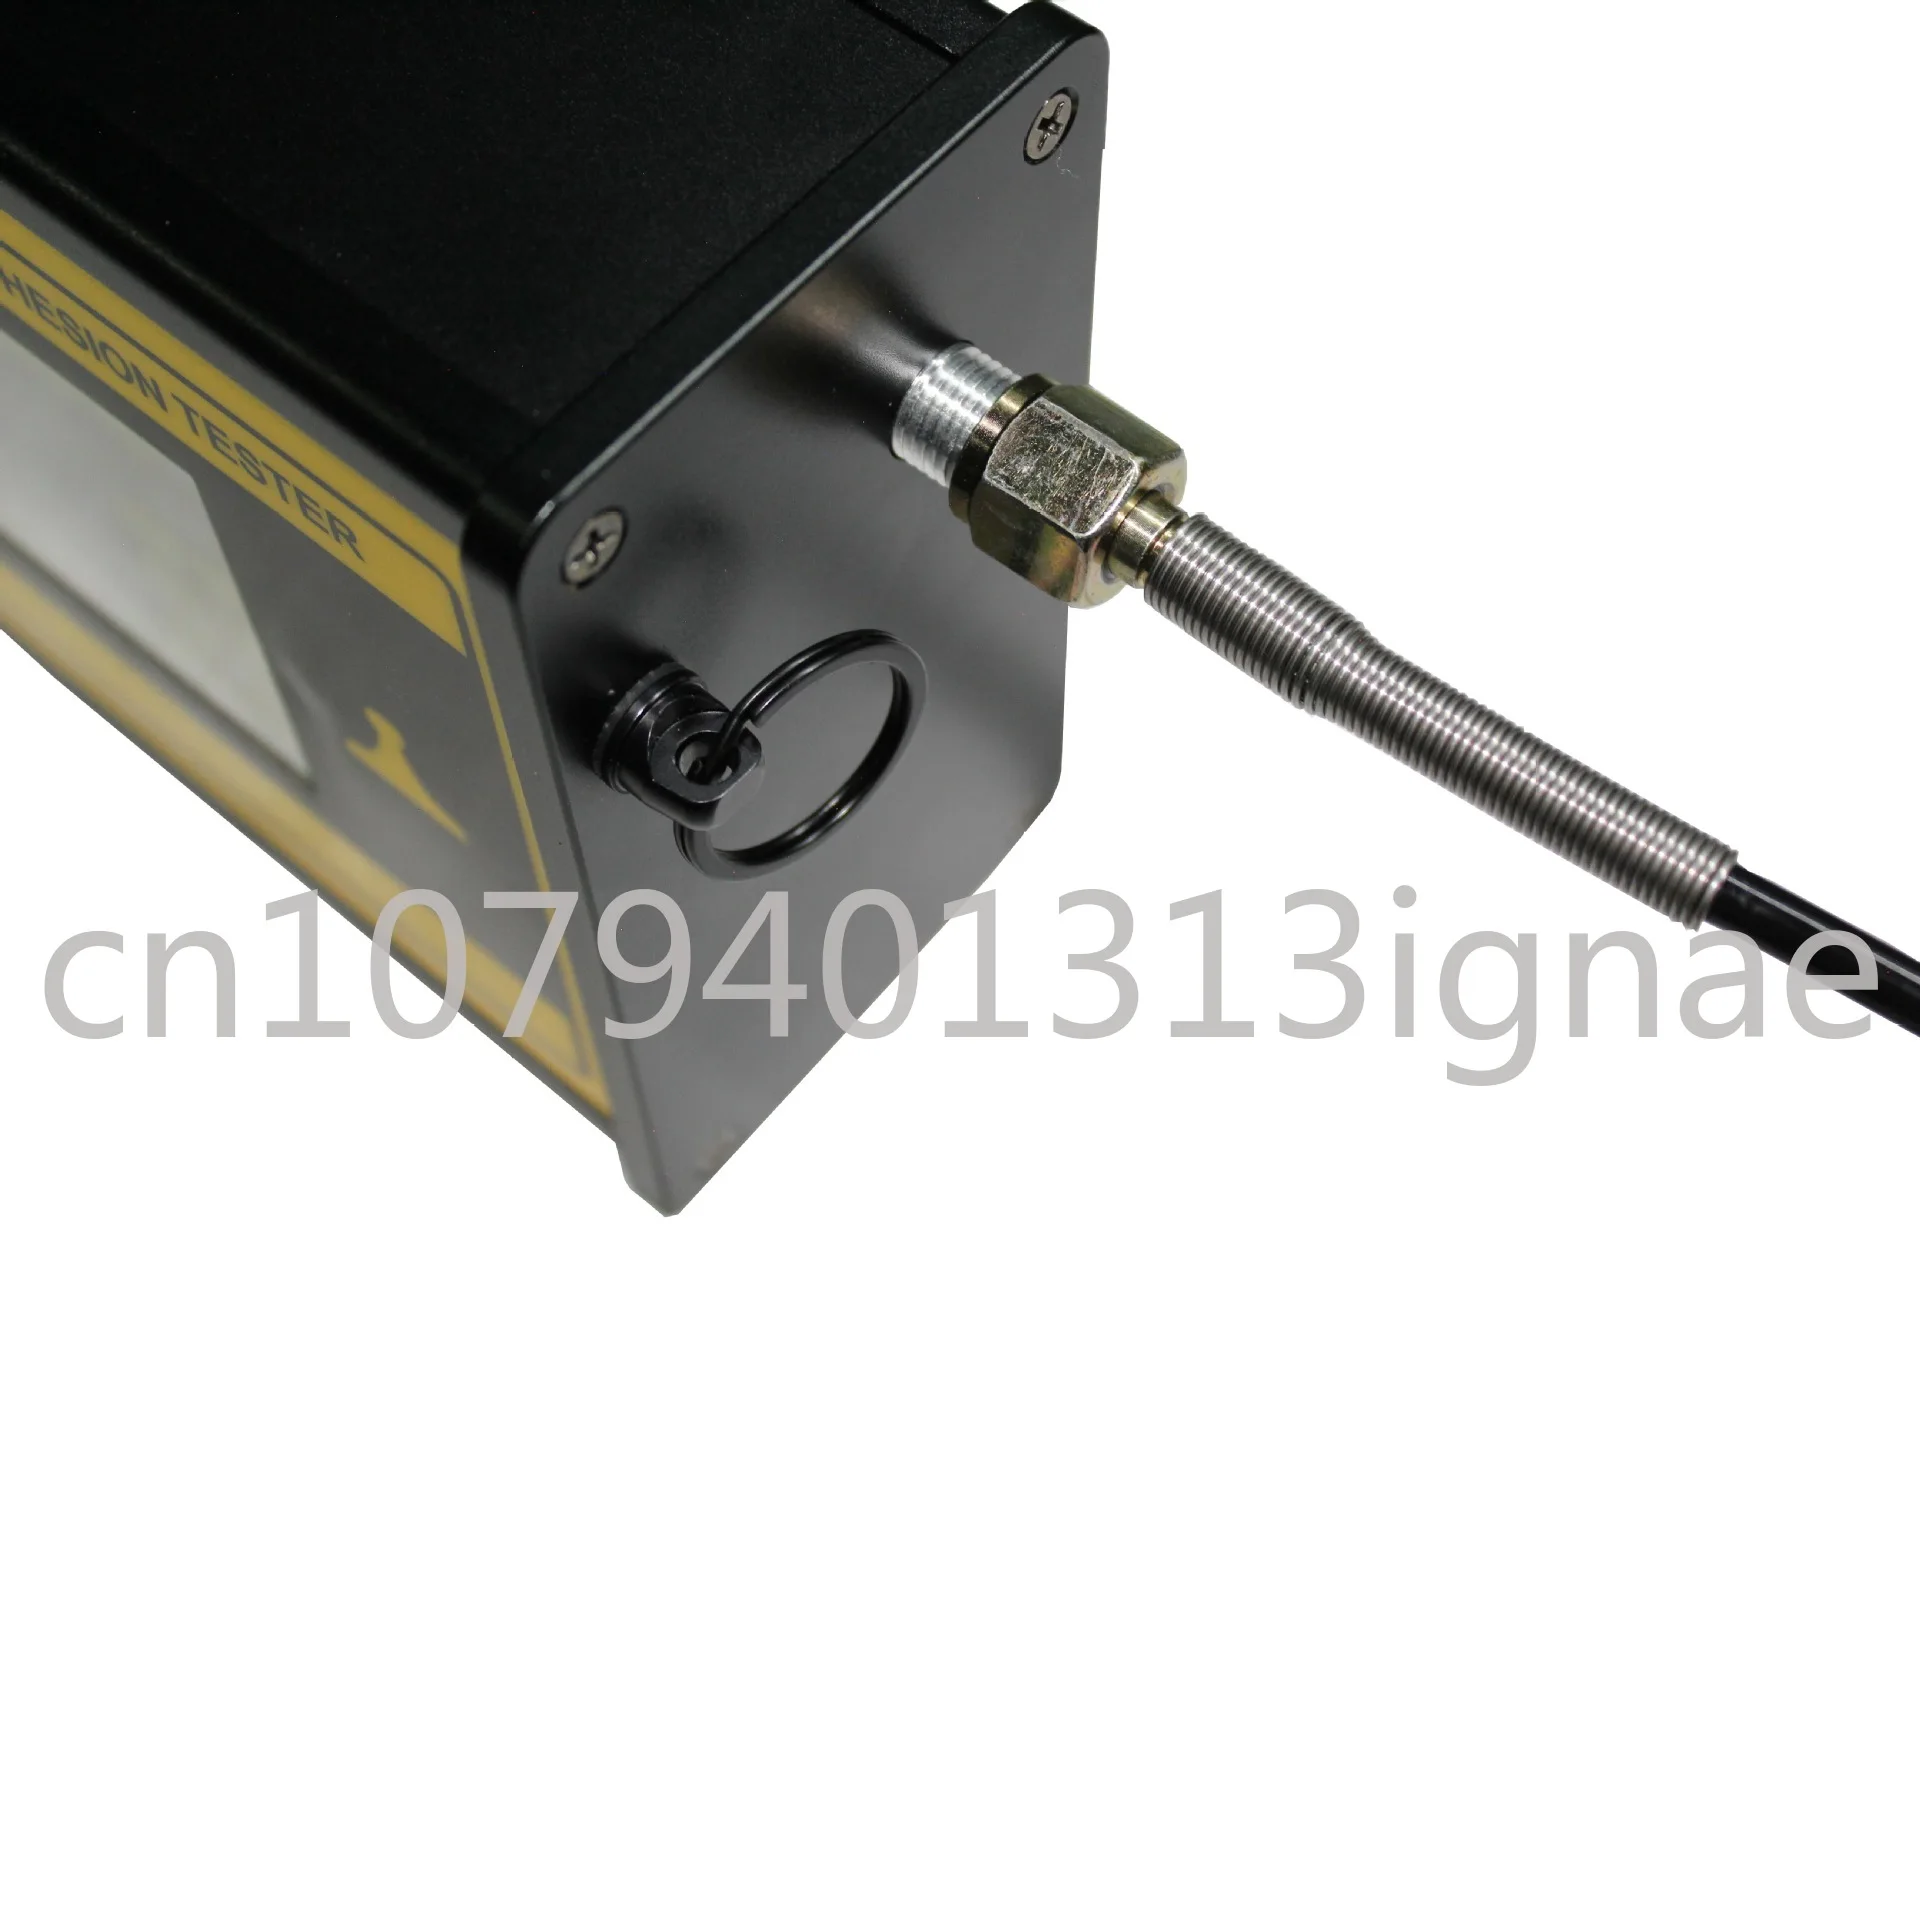 

Tensile Strength of Coating by Digital Display Pull-off Adhesion Tester